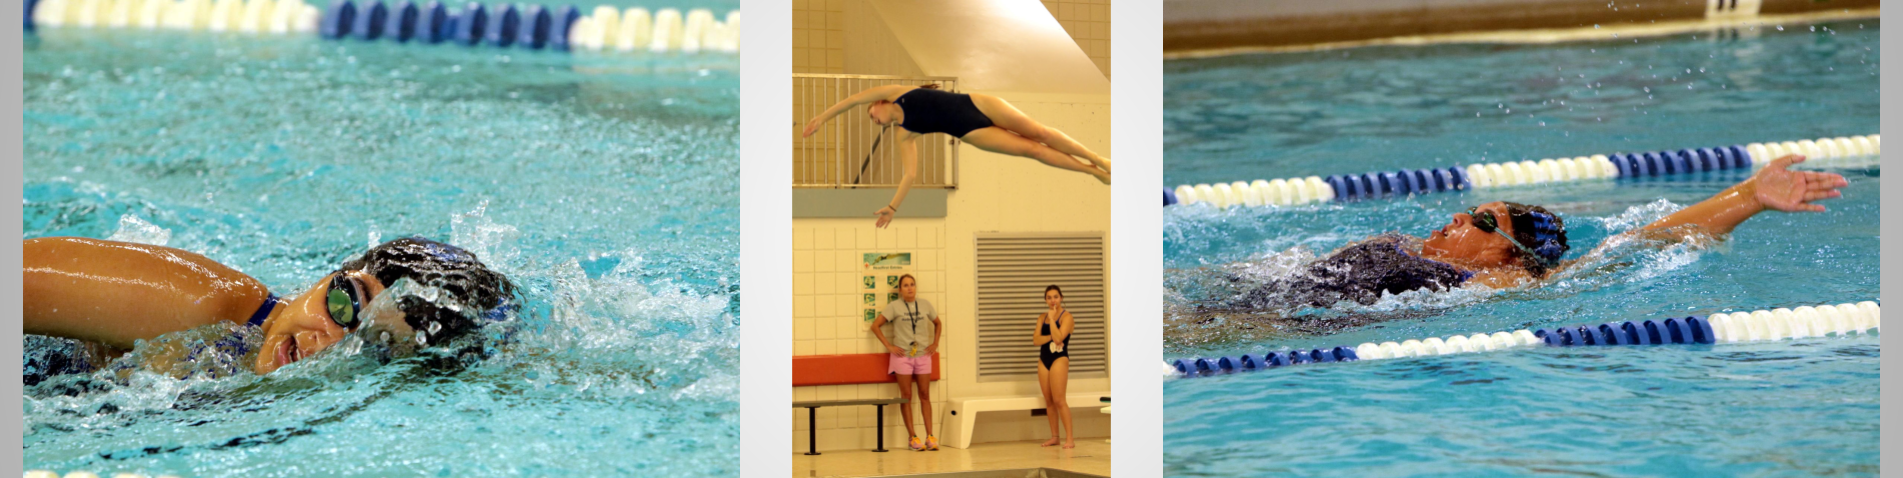 Members of the swim team in action (diving, swimming)